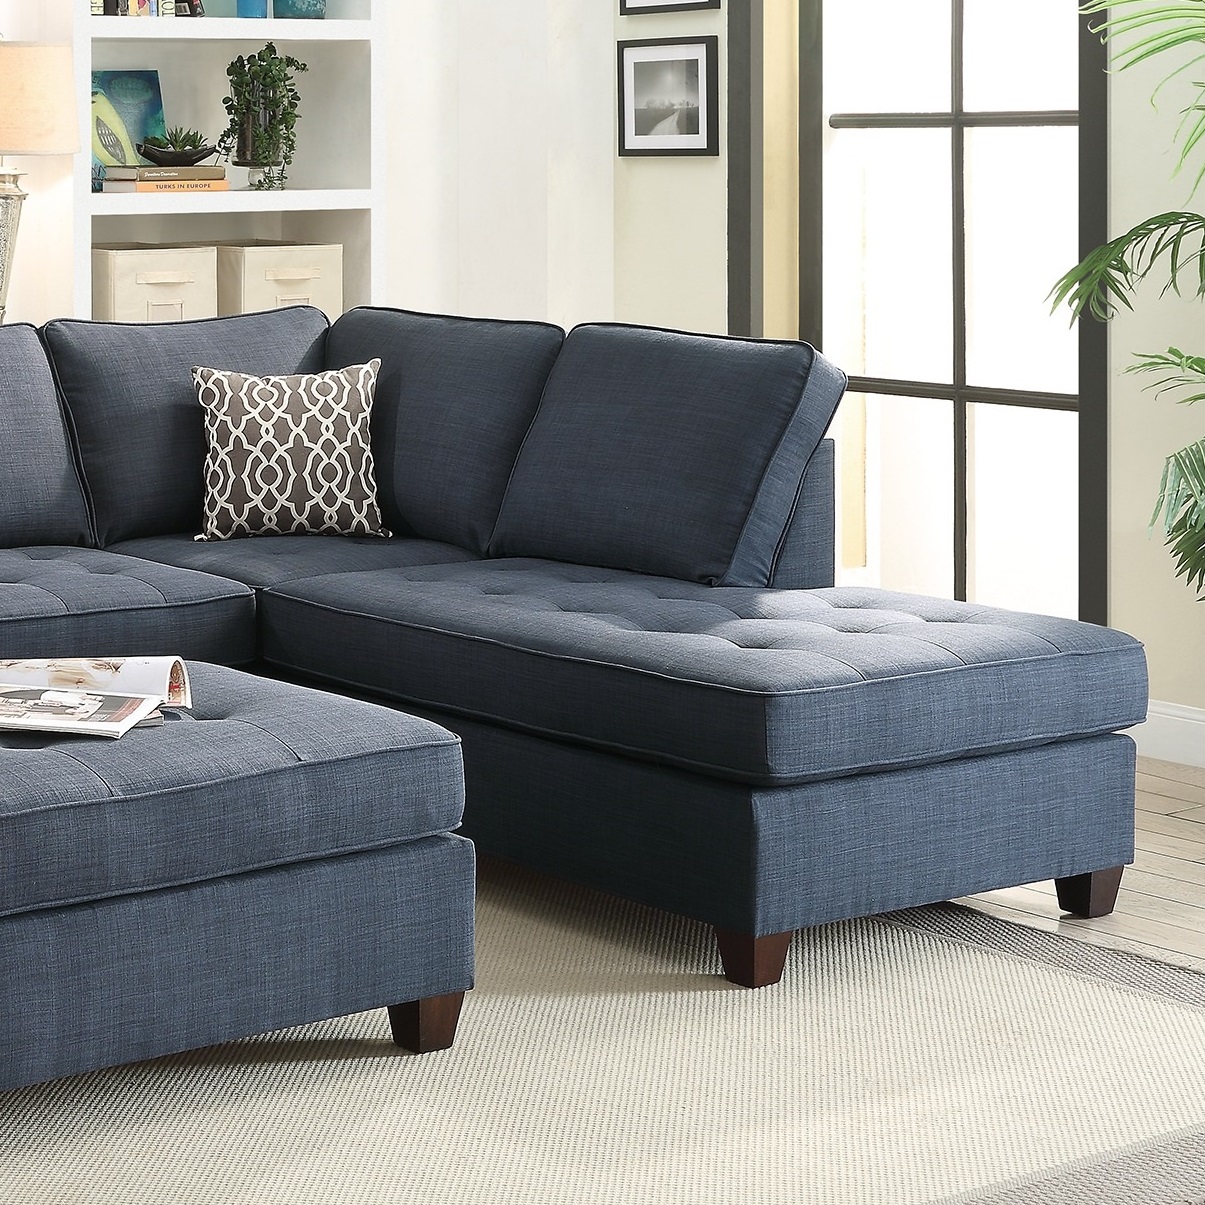 sectional couch with chaise